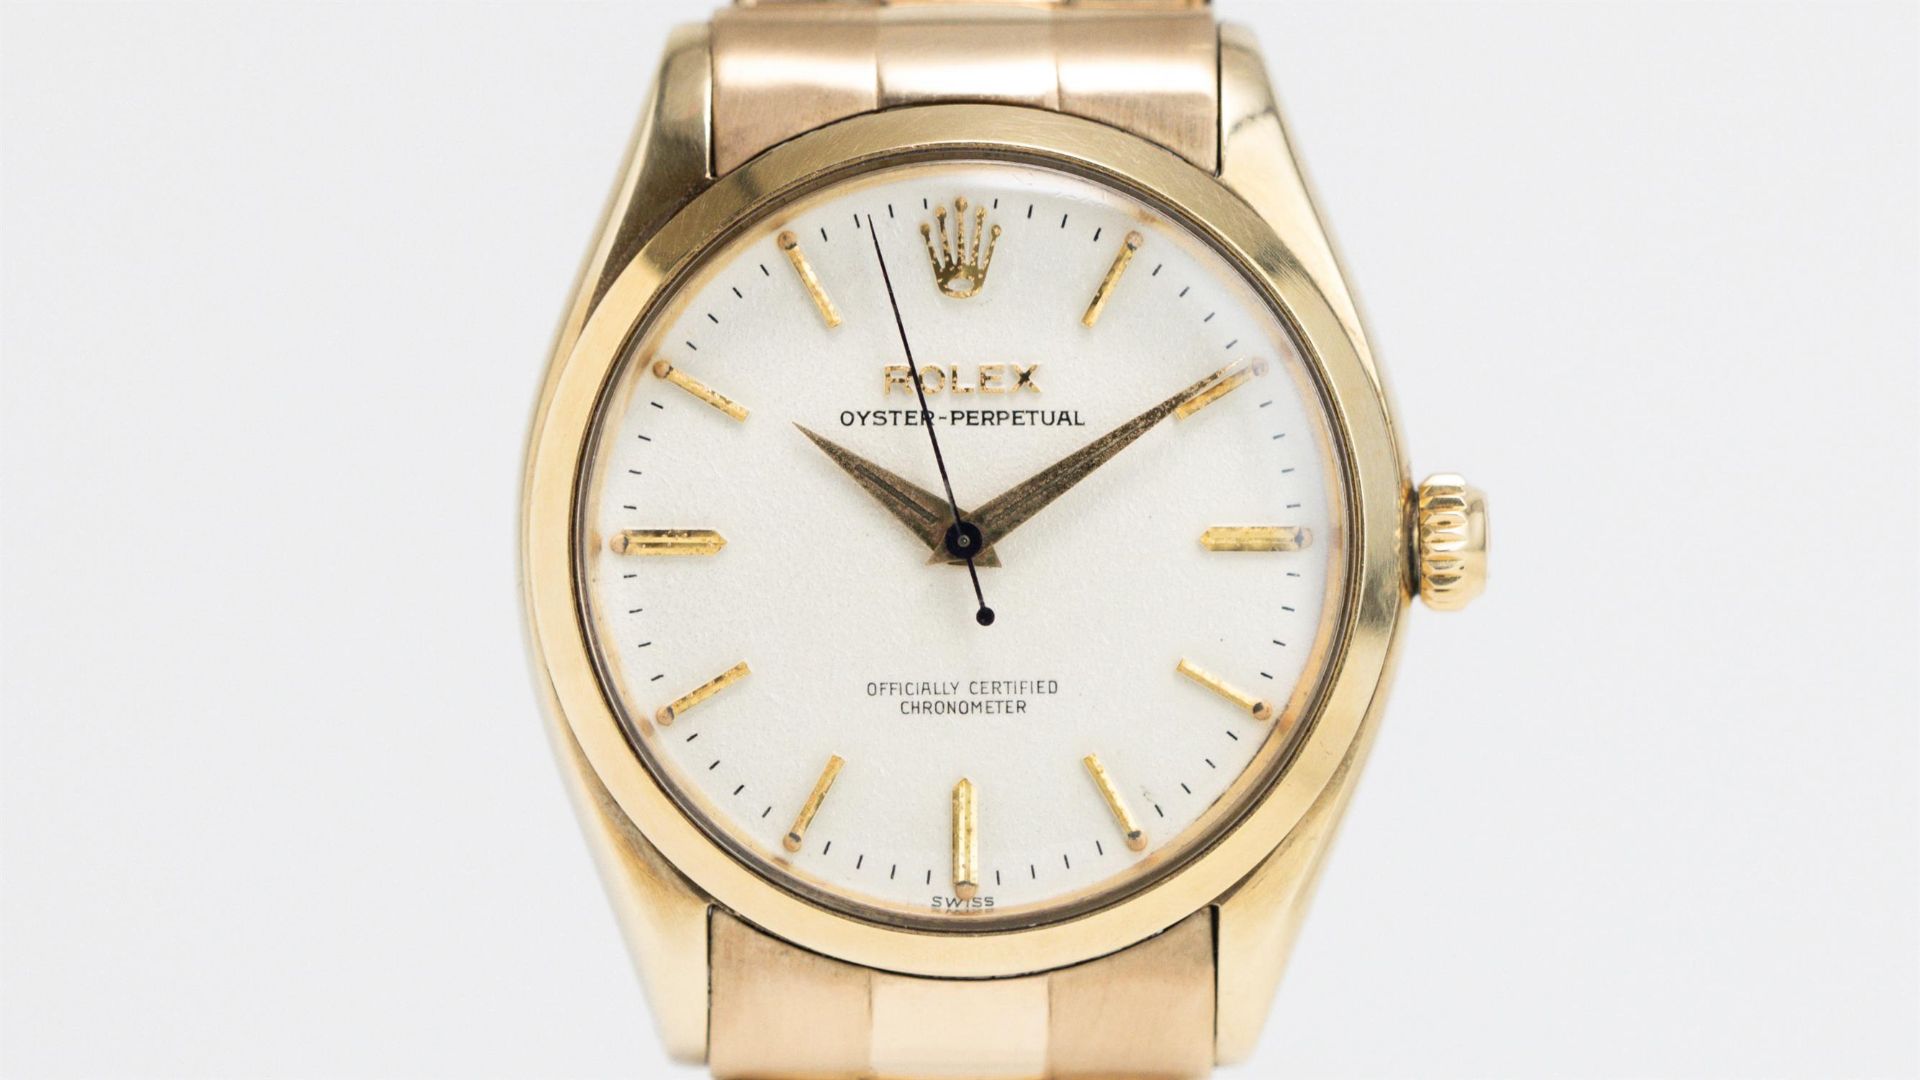 Rolex Oyster Perpetual 9ct model 6564 1946.